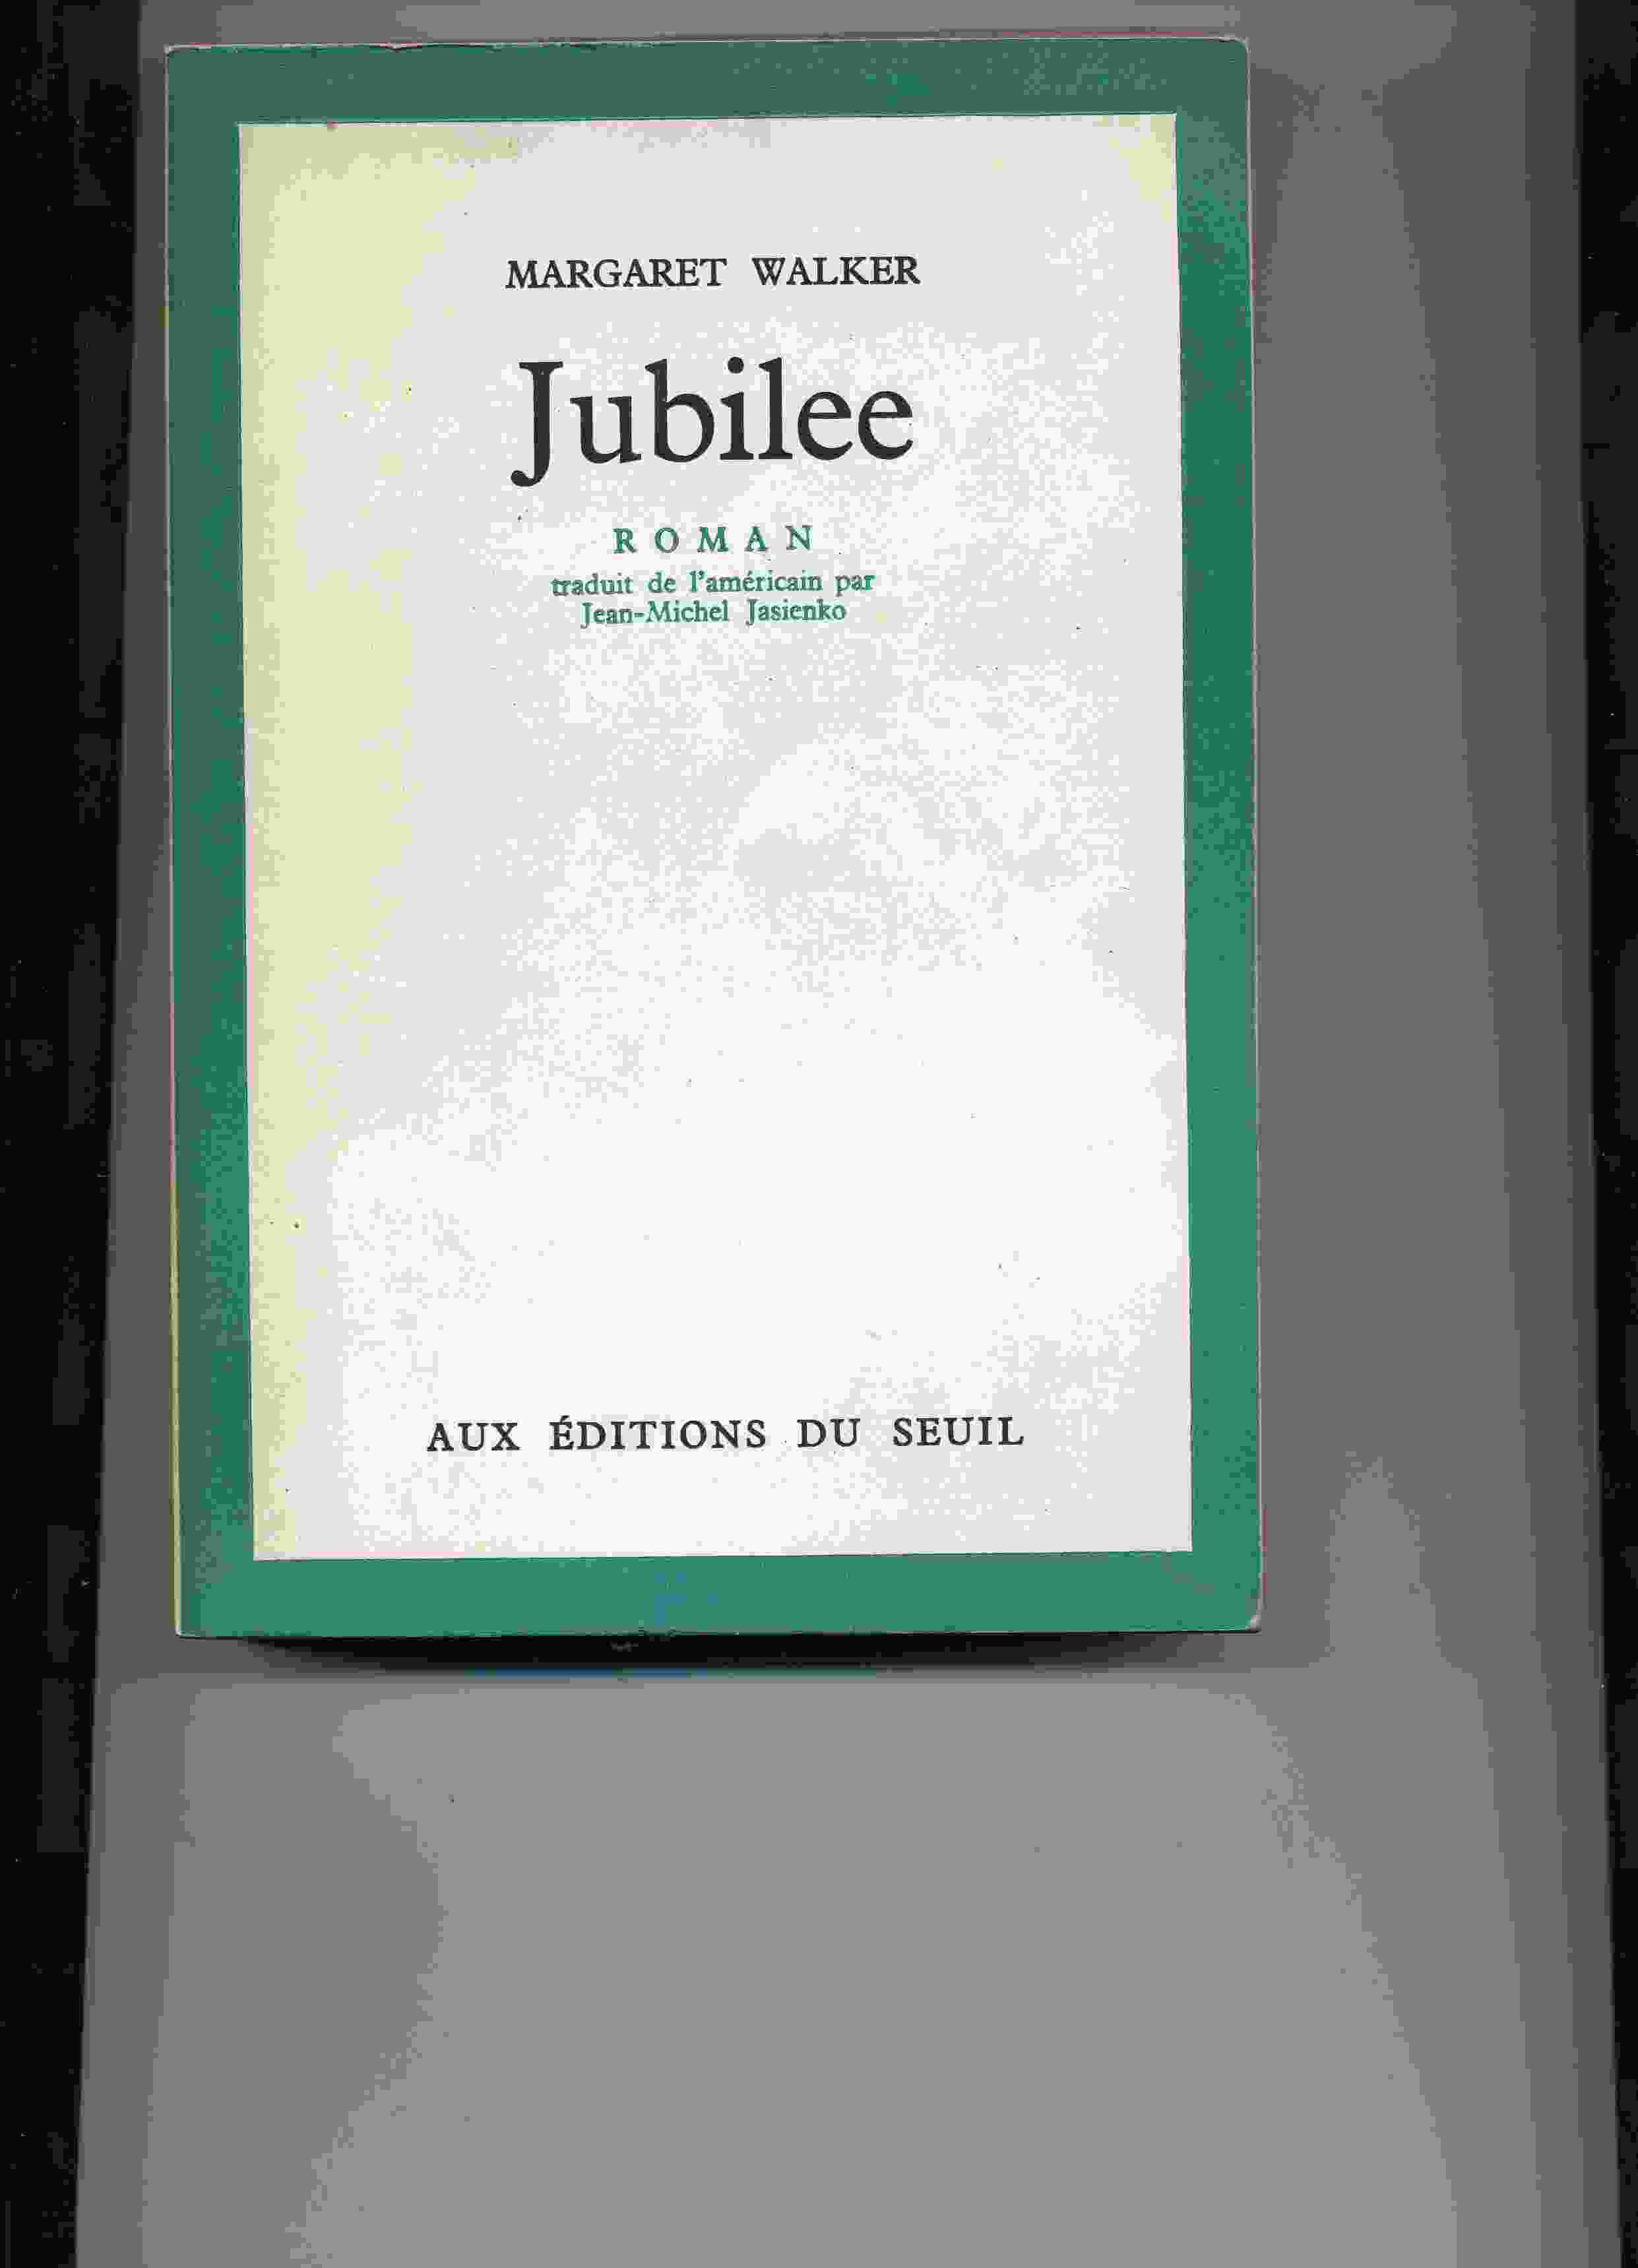 MARGARETH WALKER - JUBILEE - SEUIL - 480 Pages - Ed 1968 - Abenteuer